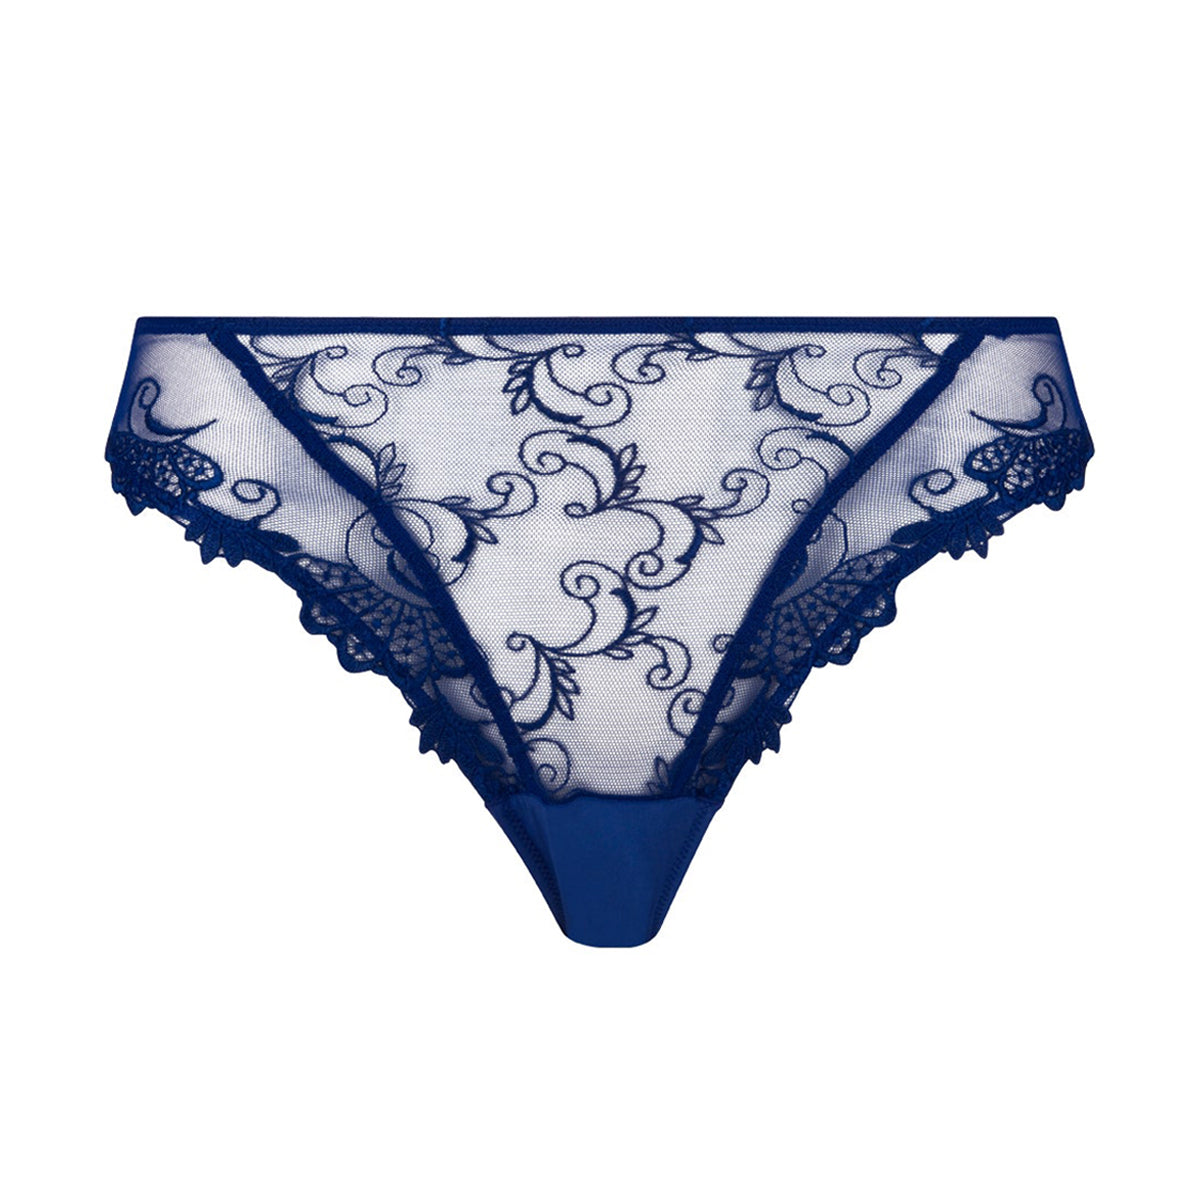 Knickers and underwear  Designer lingerie shopping – Page 3